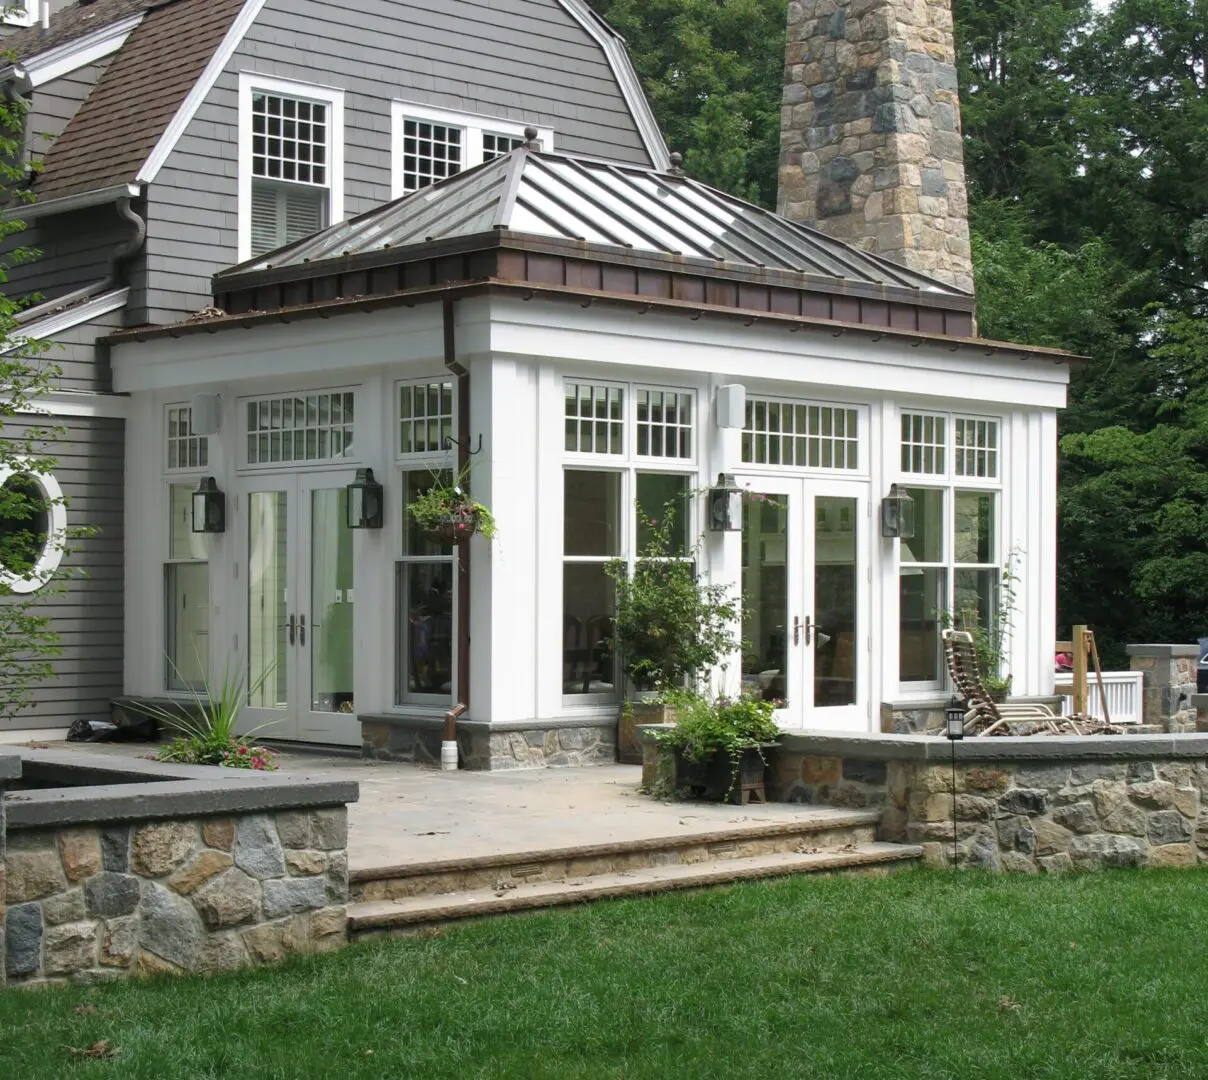 A large white house with stone walls and a patio.